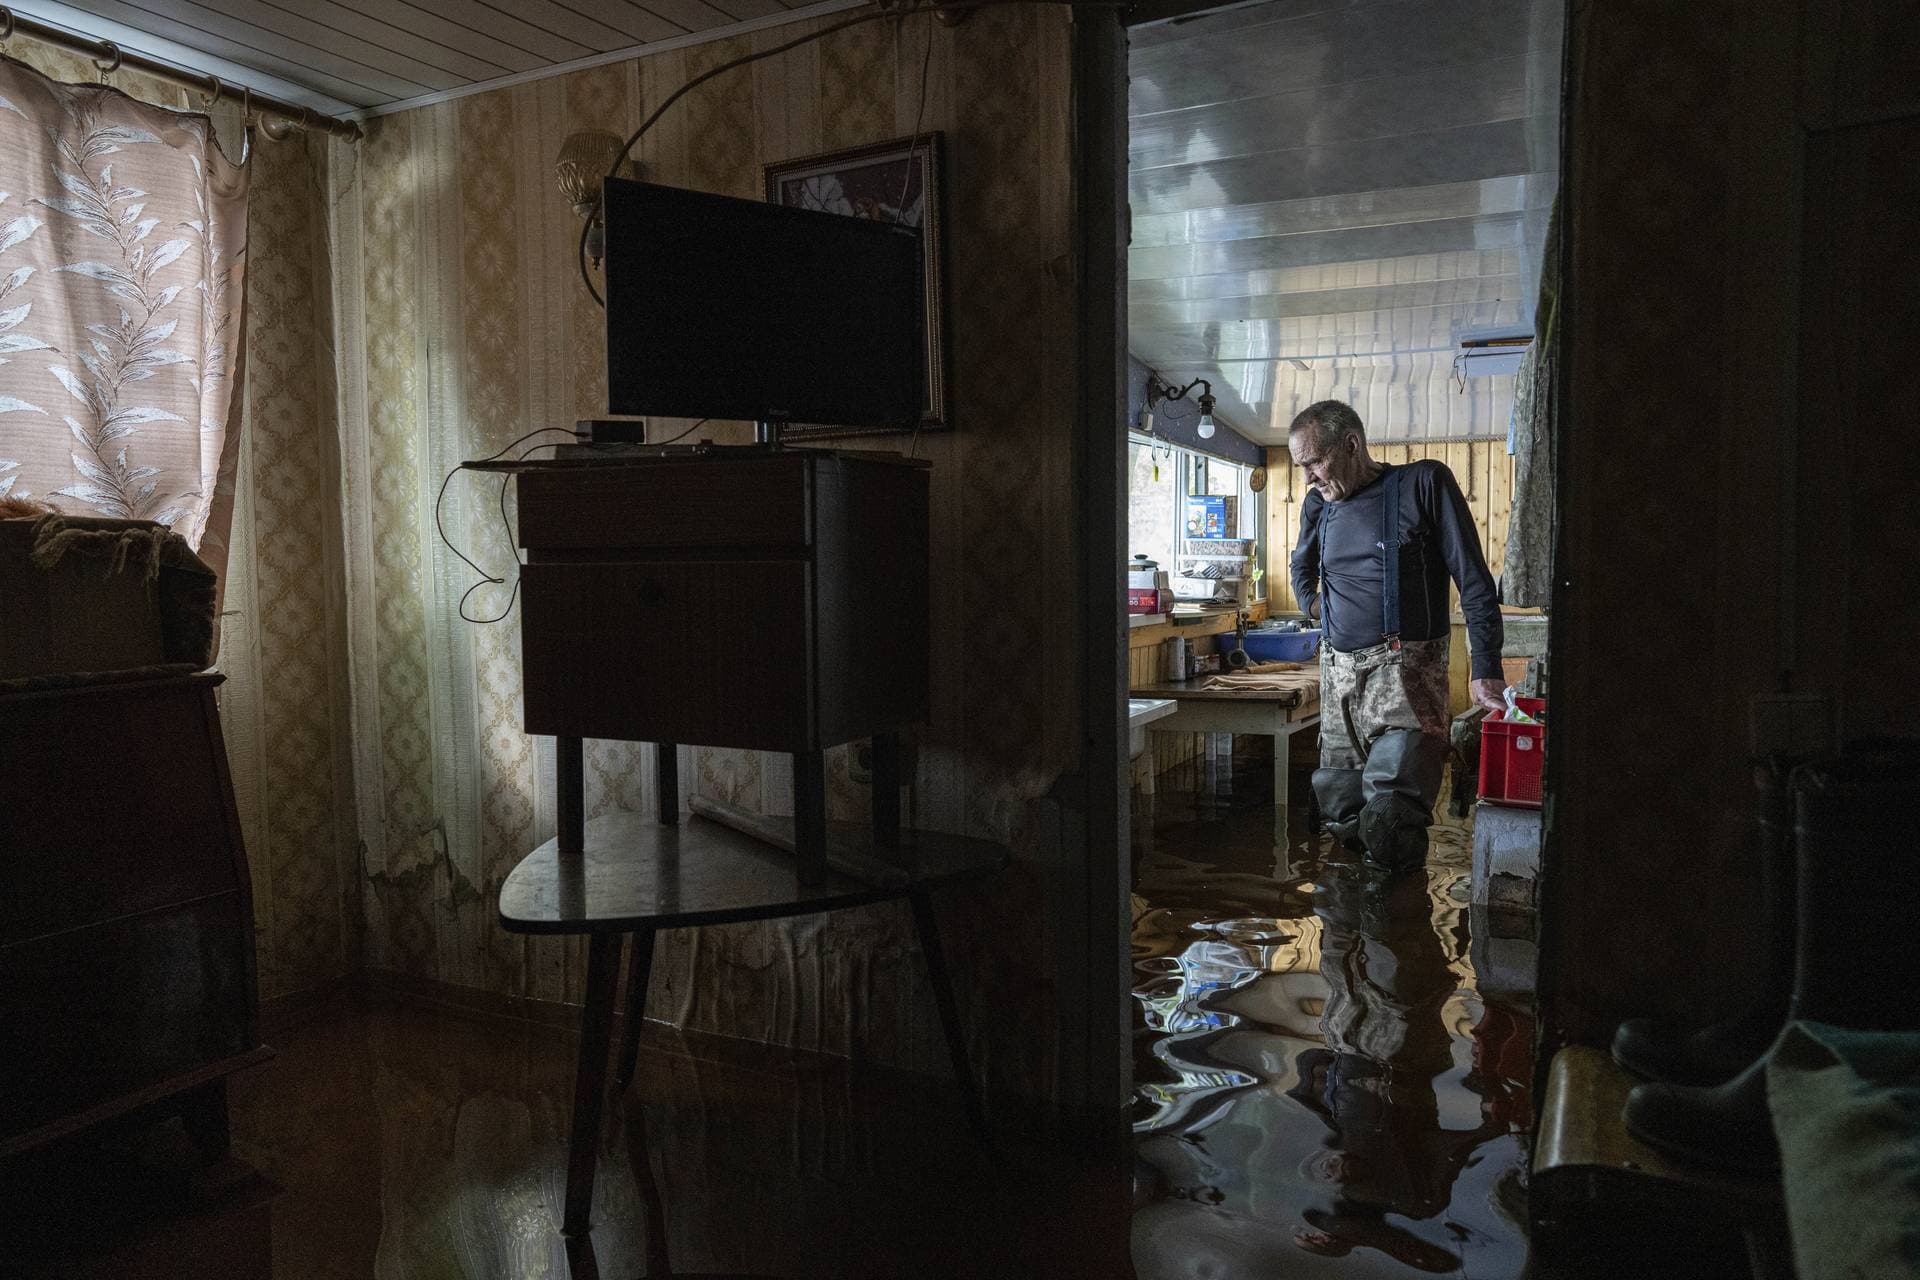 Ihor Medyunov stands at the kitchen of his flooded house in the island of Kakhovka reservoir on Dnipro river near Lysohirka